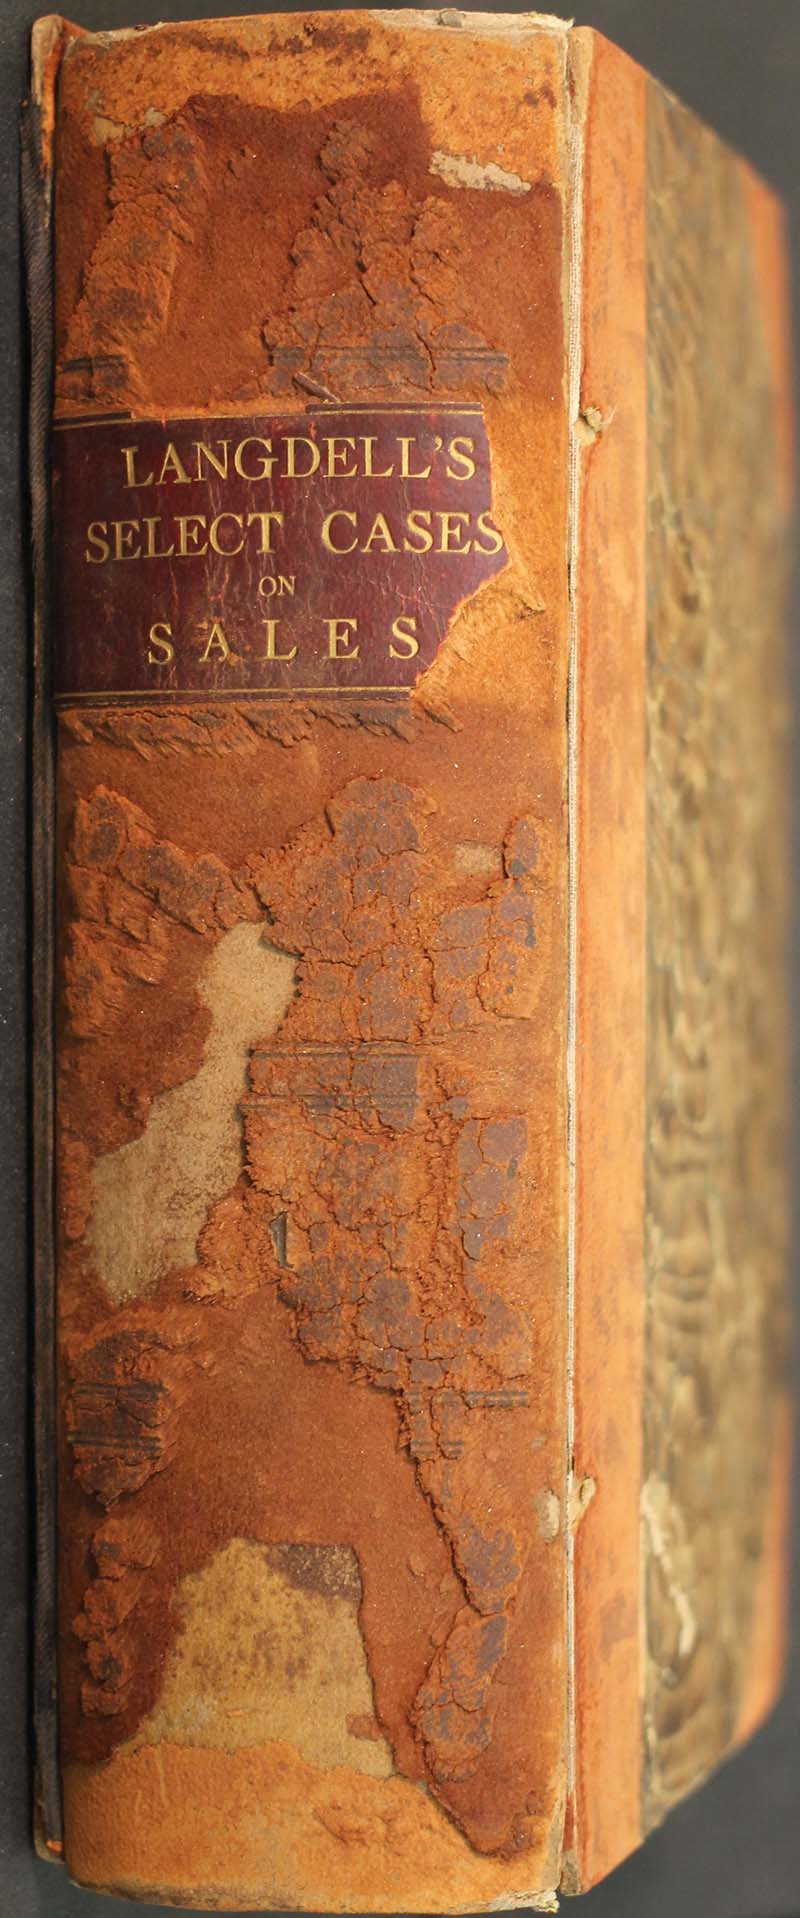 Worn-down, copper colored spine for Brandeis's copy of 'Langdell's Select Cases on Sales' (color photograph)